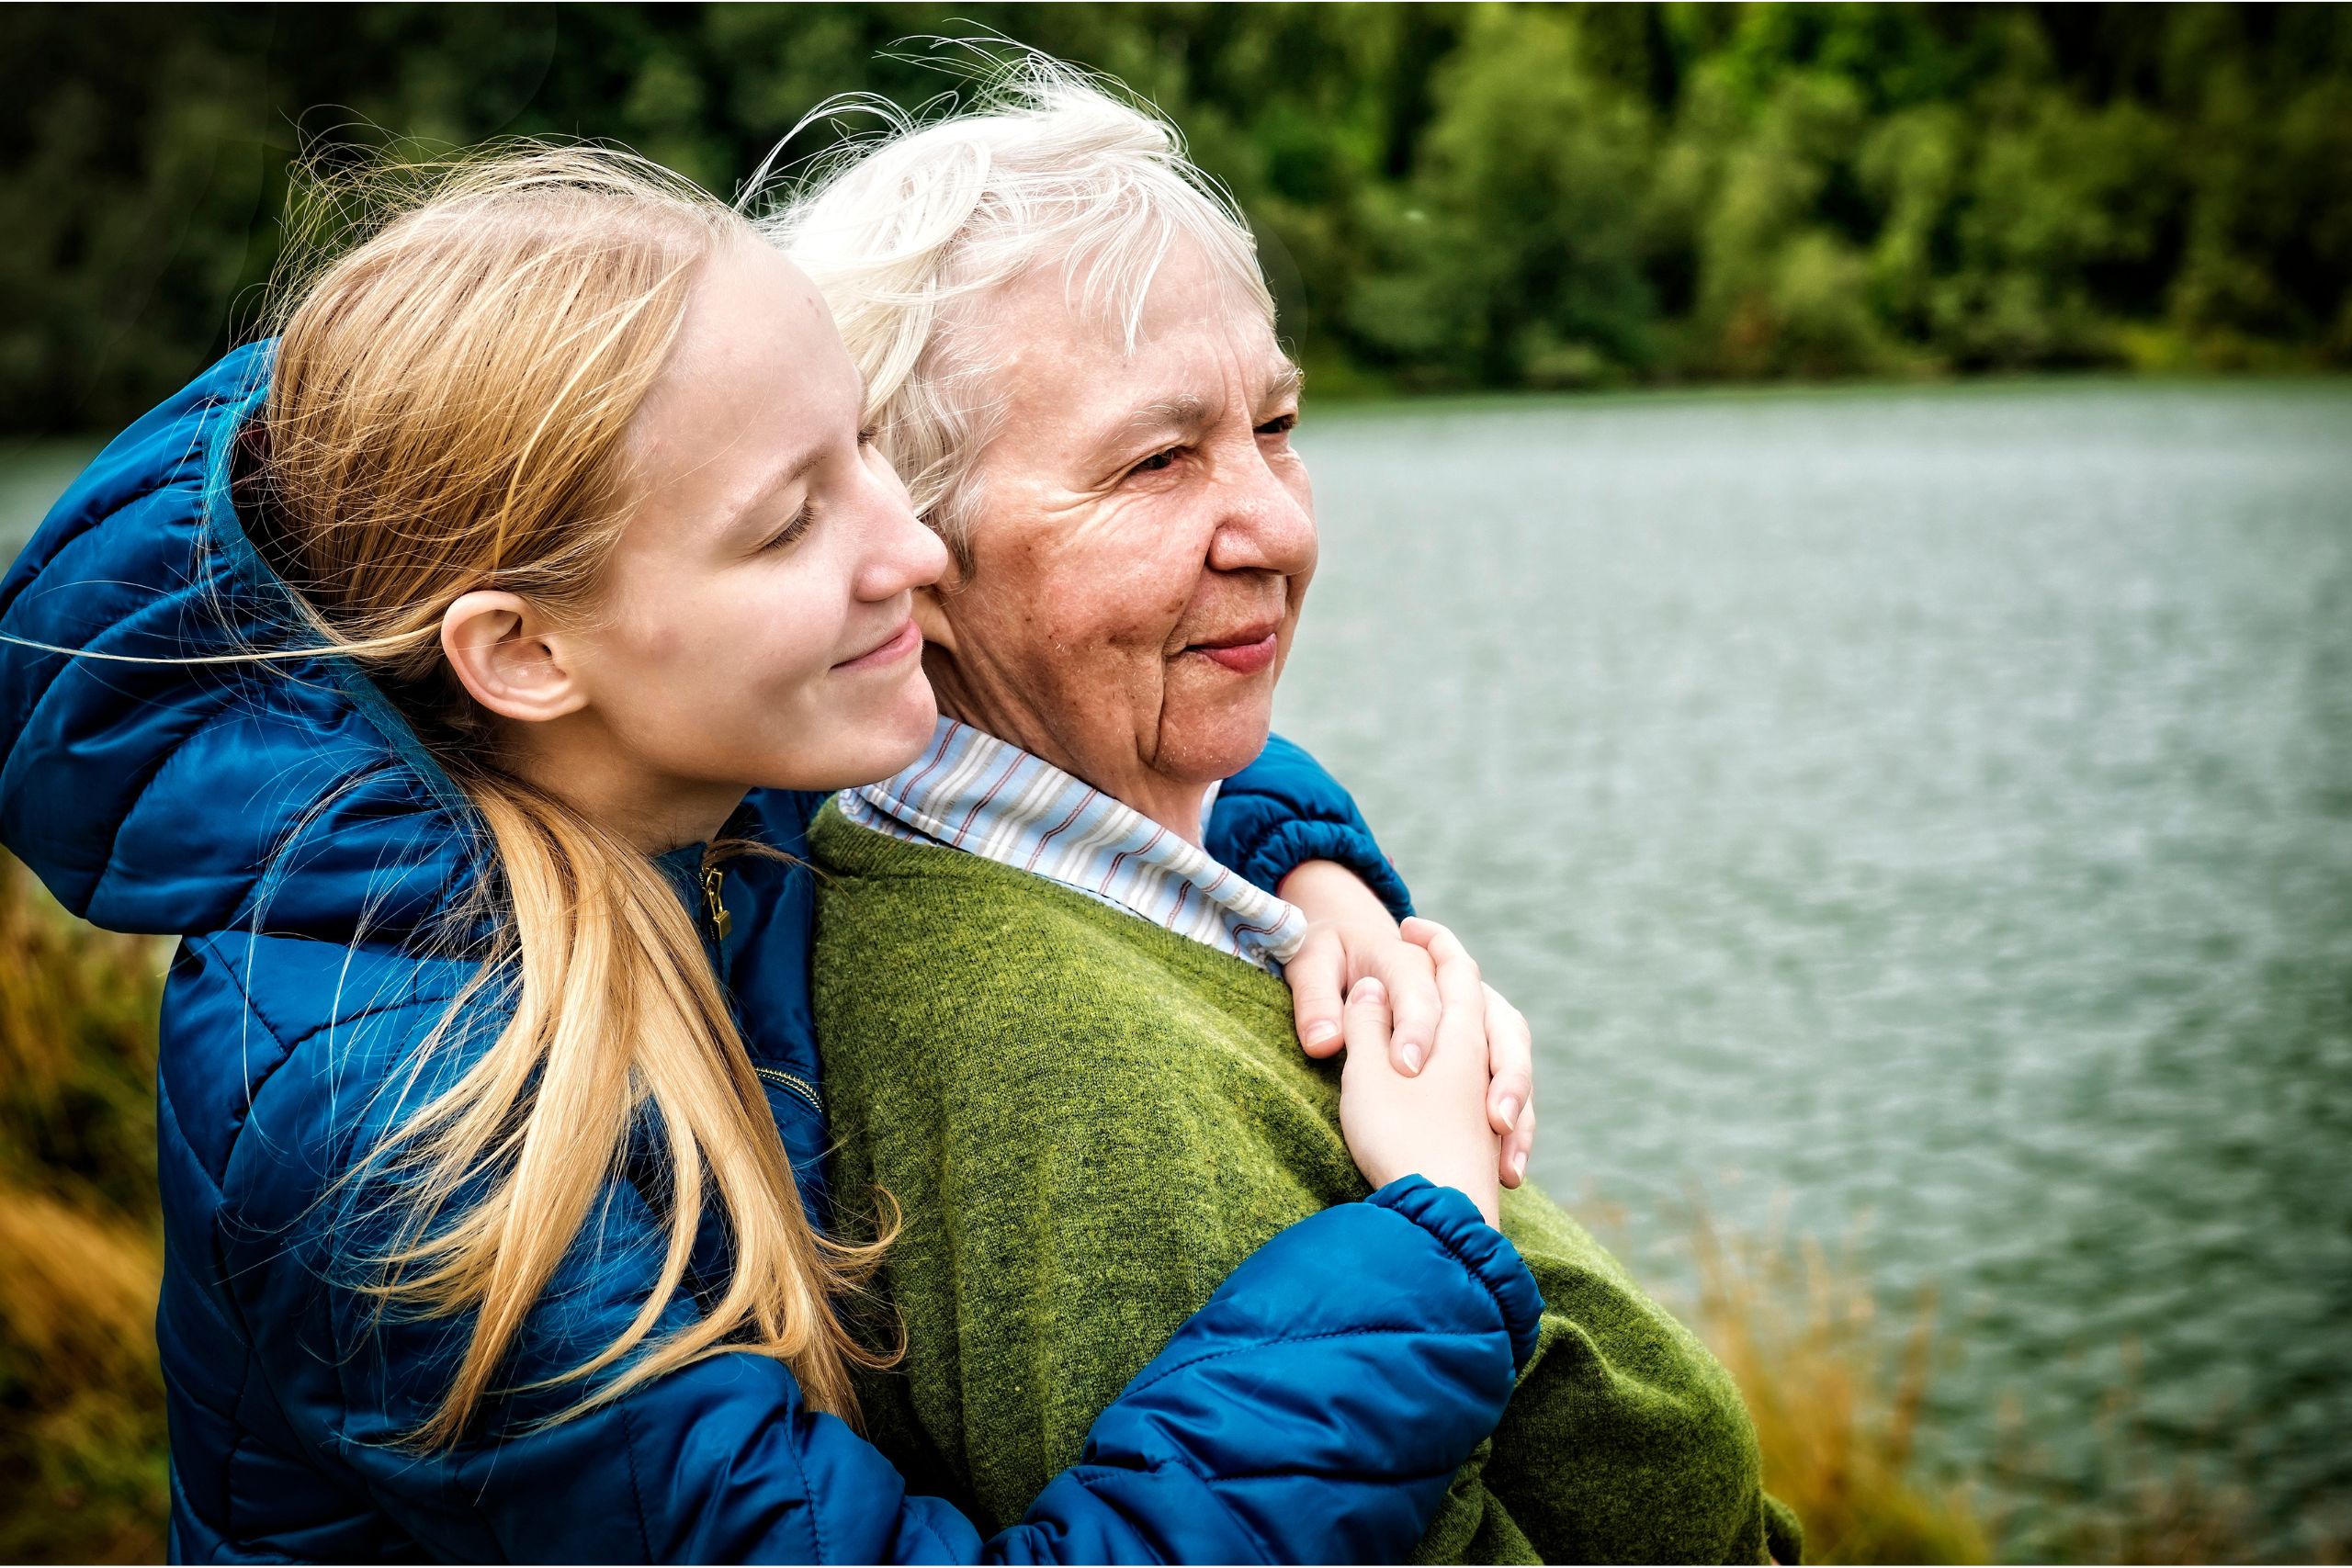 A teenager hugging an older lady from behind as they look out at a lake.